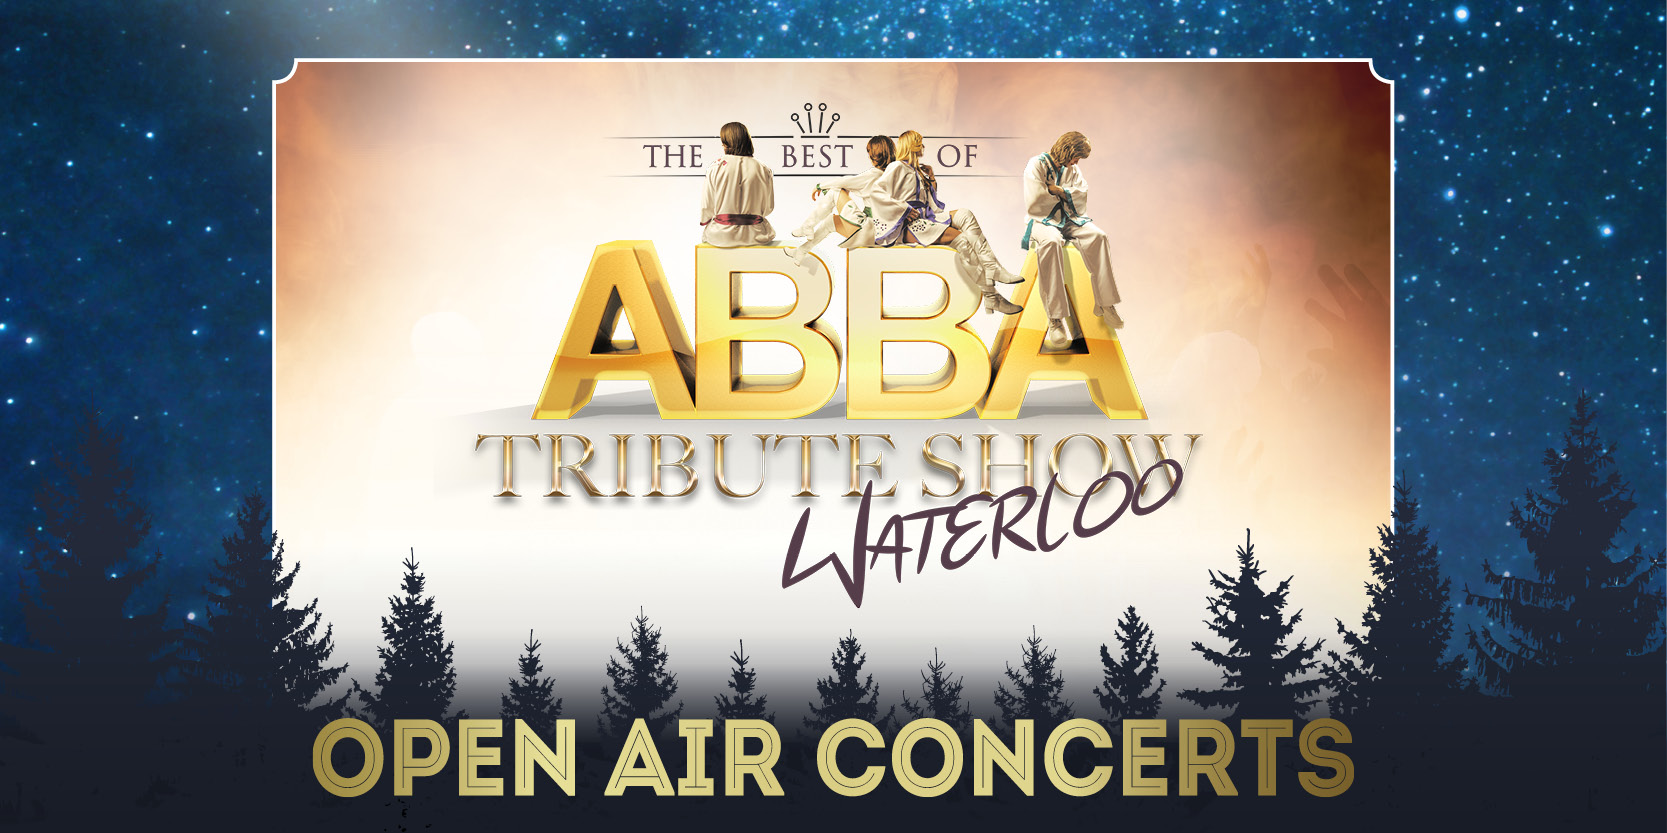 Waterloo The Best Of Abba Open Air Concert on 22/07/2022